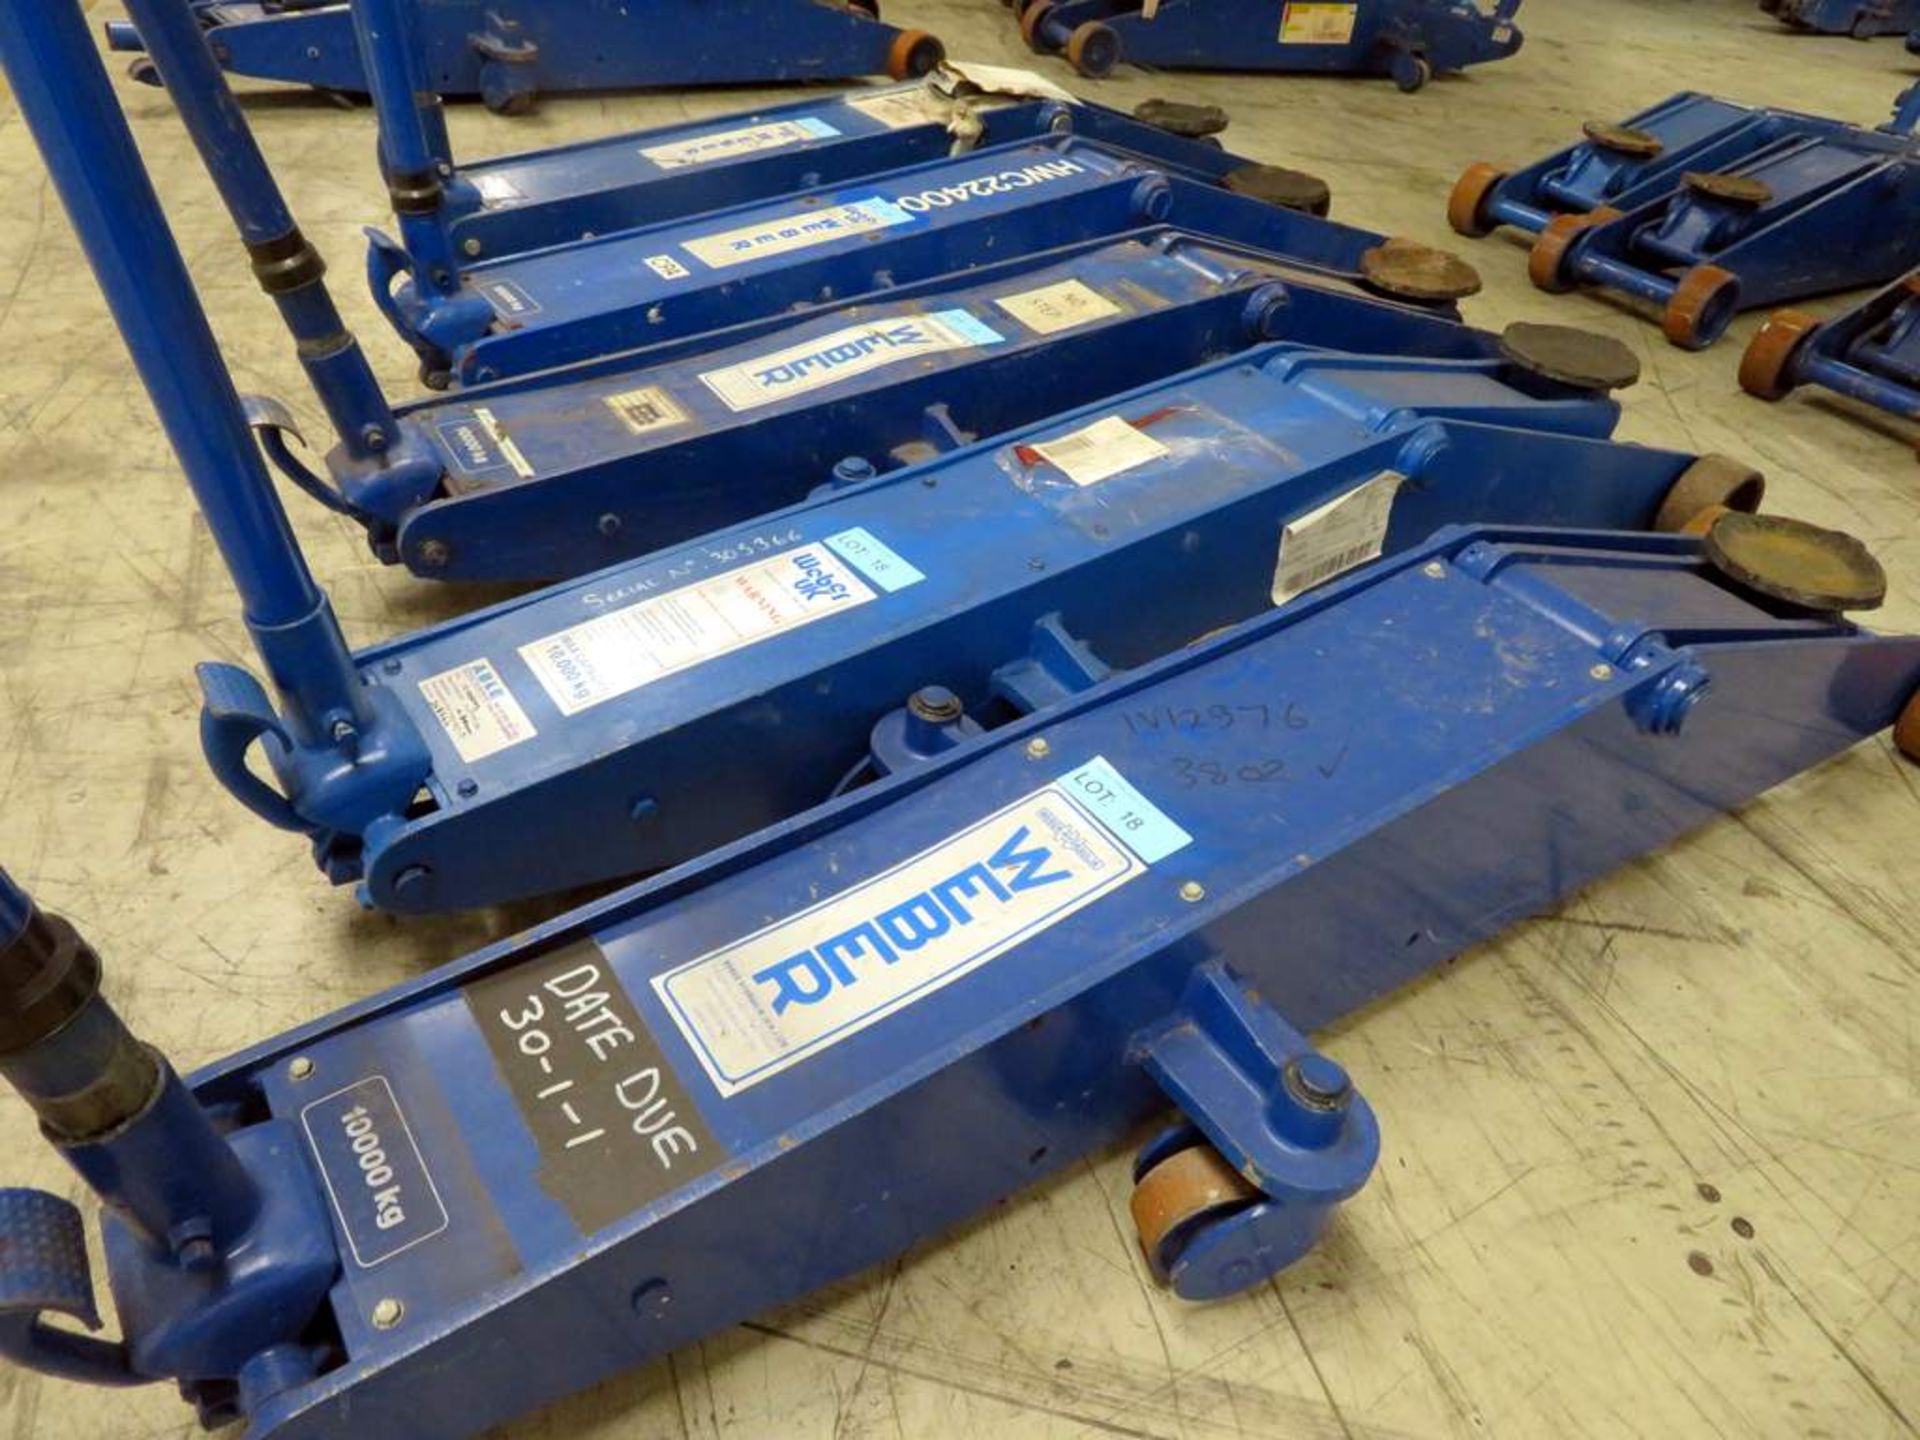 5x Weber 10 Tonne Vehicle Trolley Jacks Complete With Handle - WDK100LQ - Working Condition - Image 4 of 9